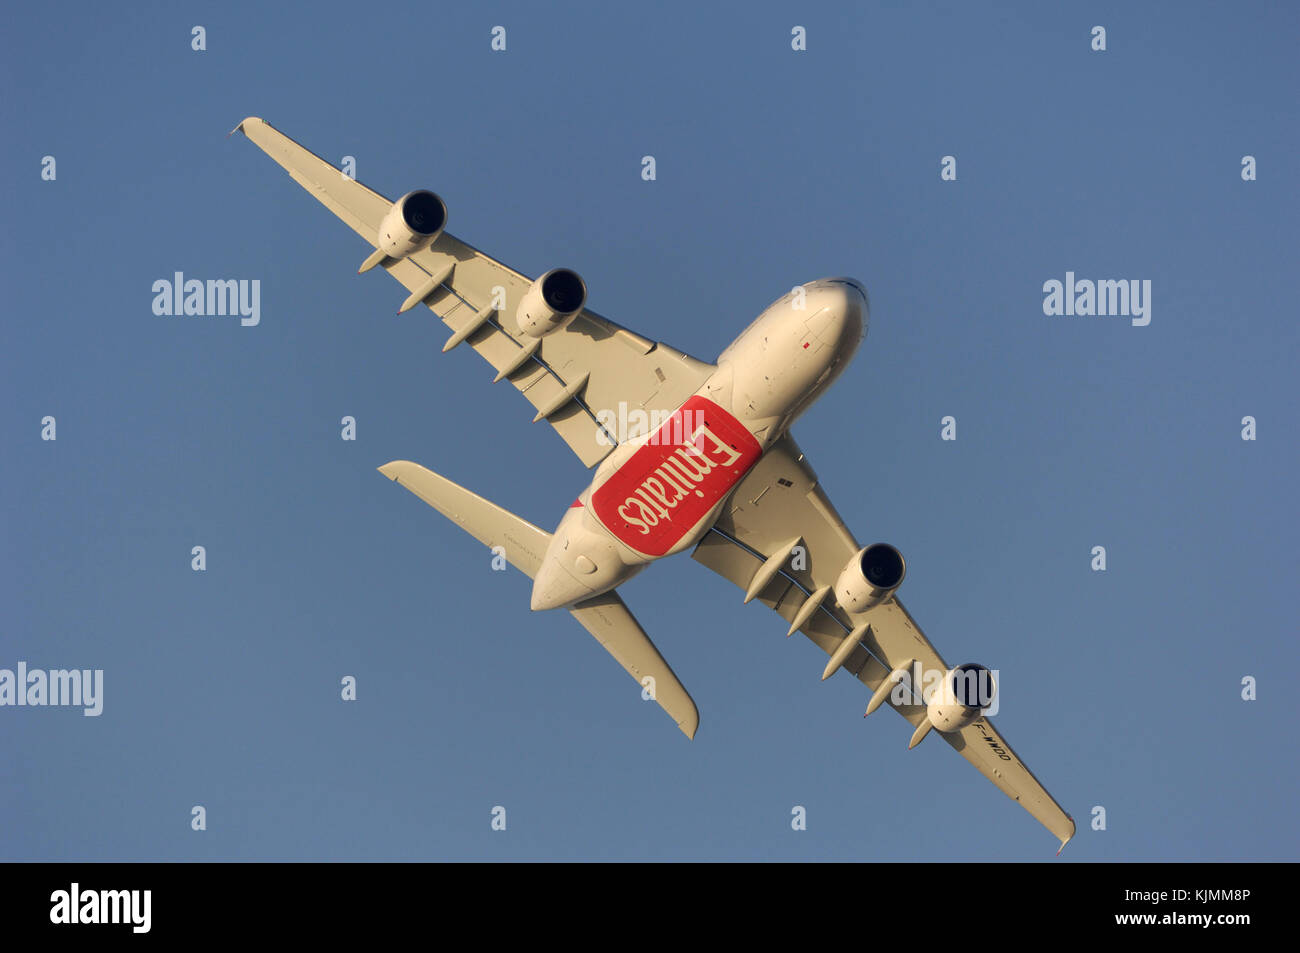 Airbus A380 prototype aircraft serial number msn004 flypast showing 'Emirates' logo advert underneath Stock Photo